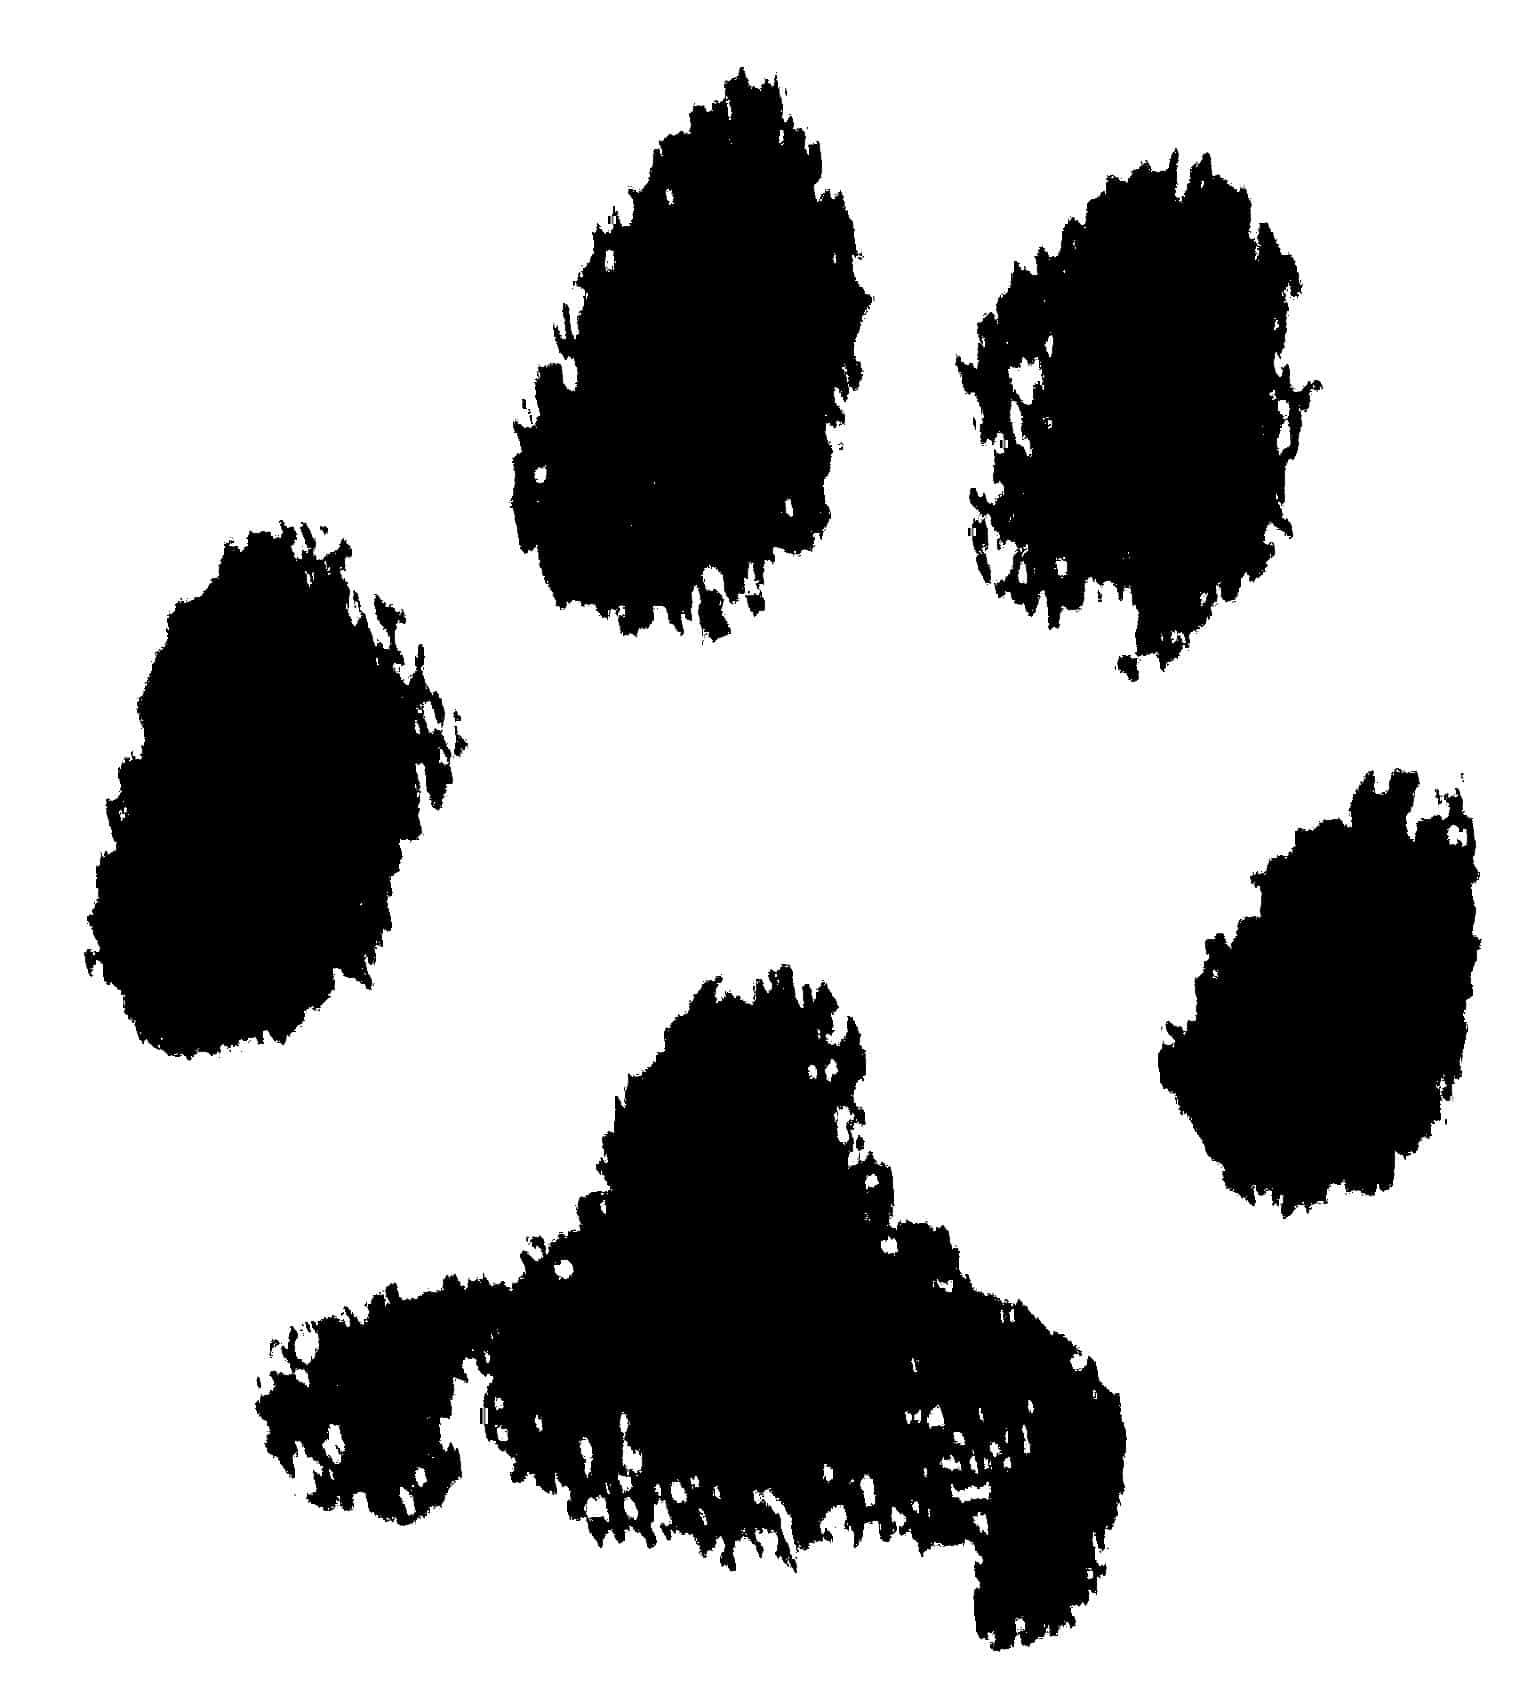 Wirral's paw print taken with a paw print kit after tidying up